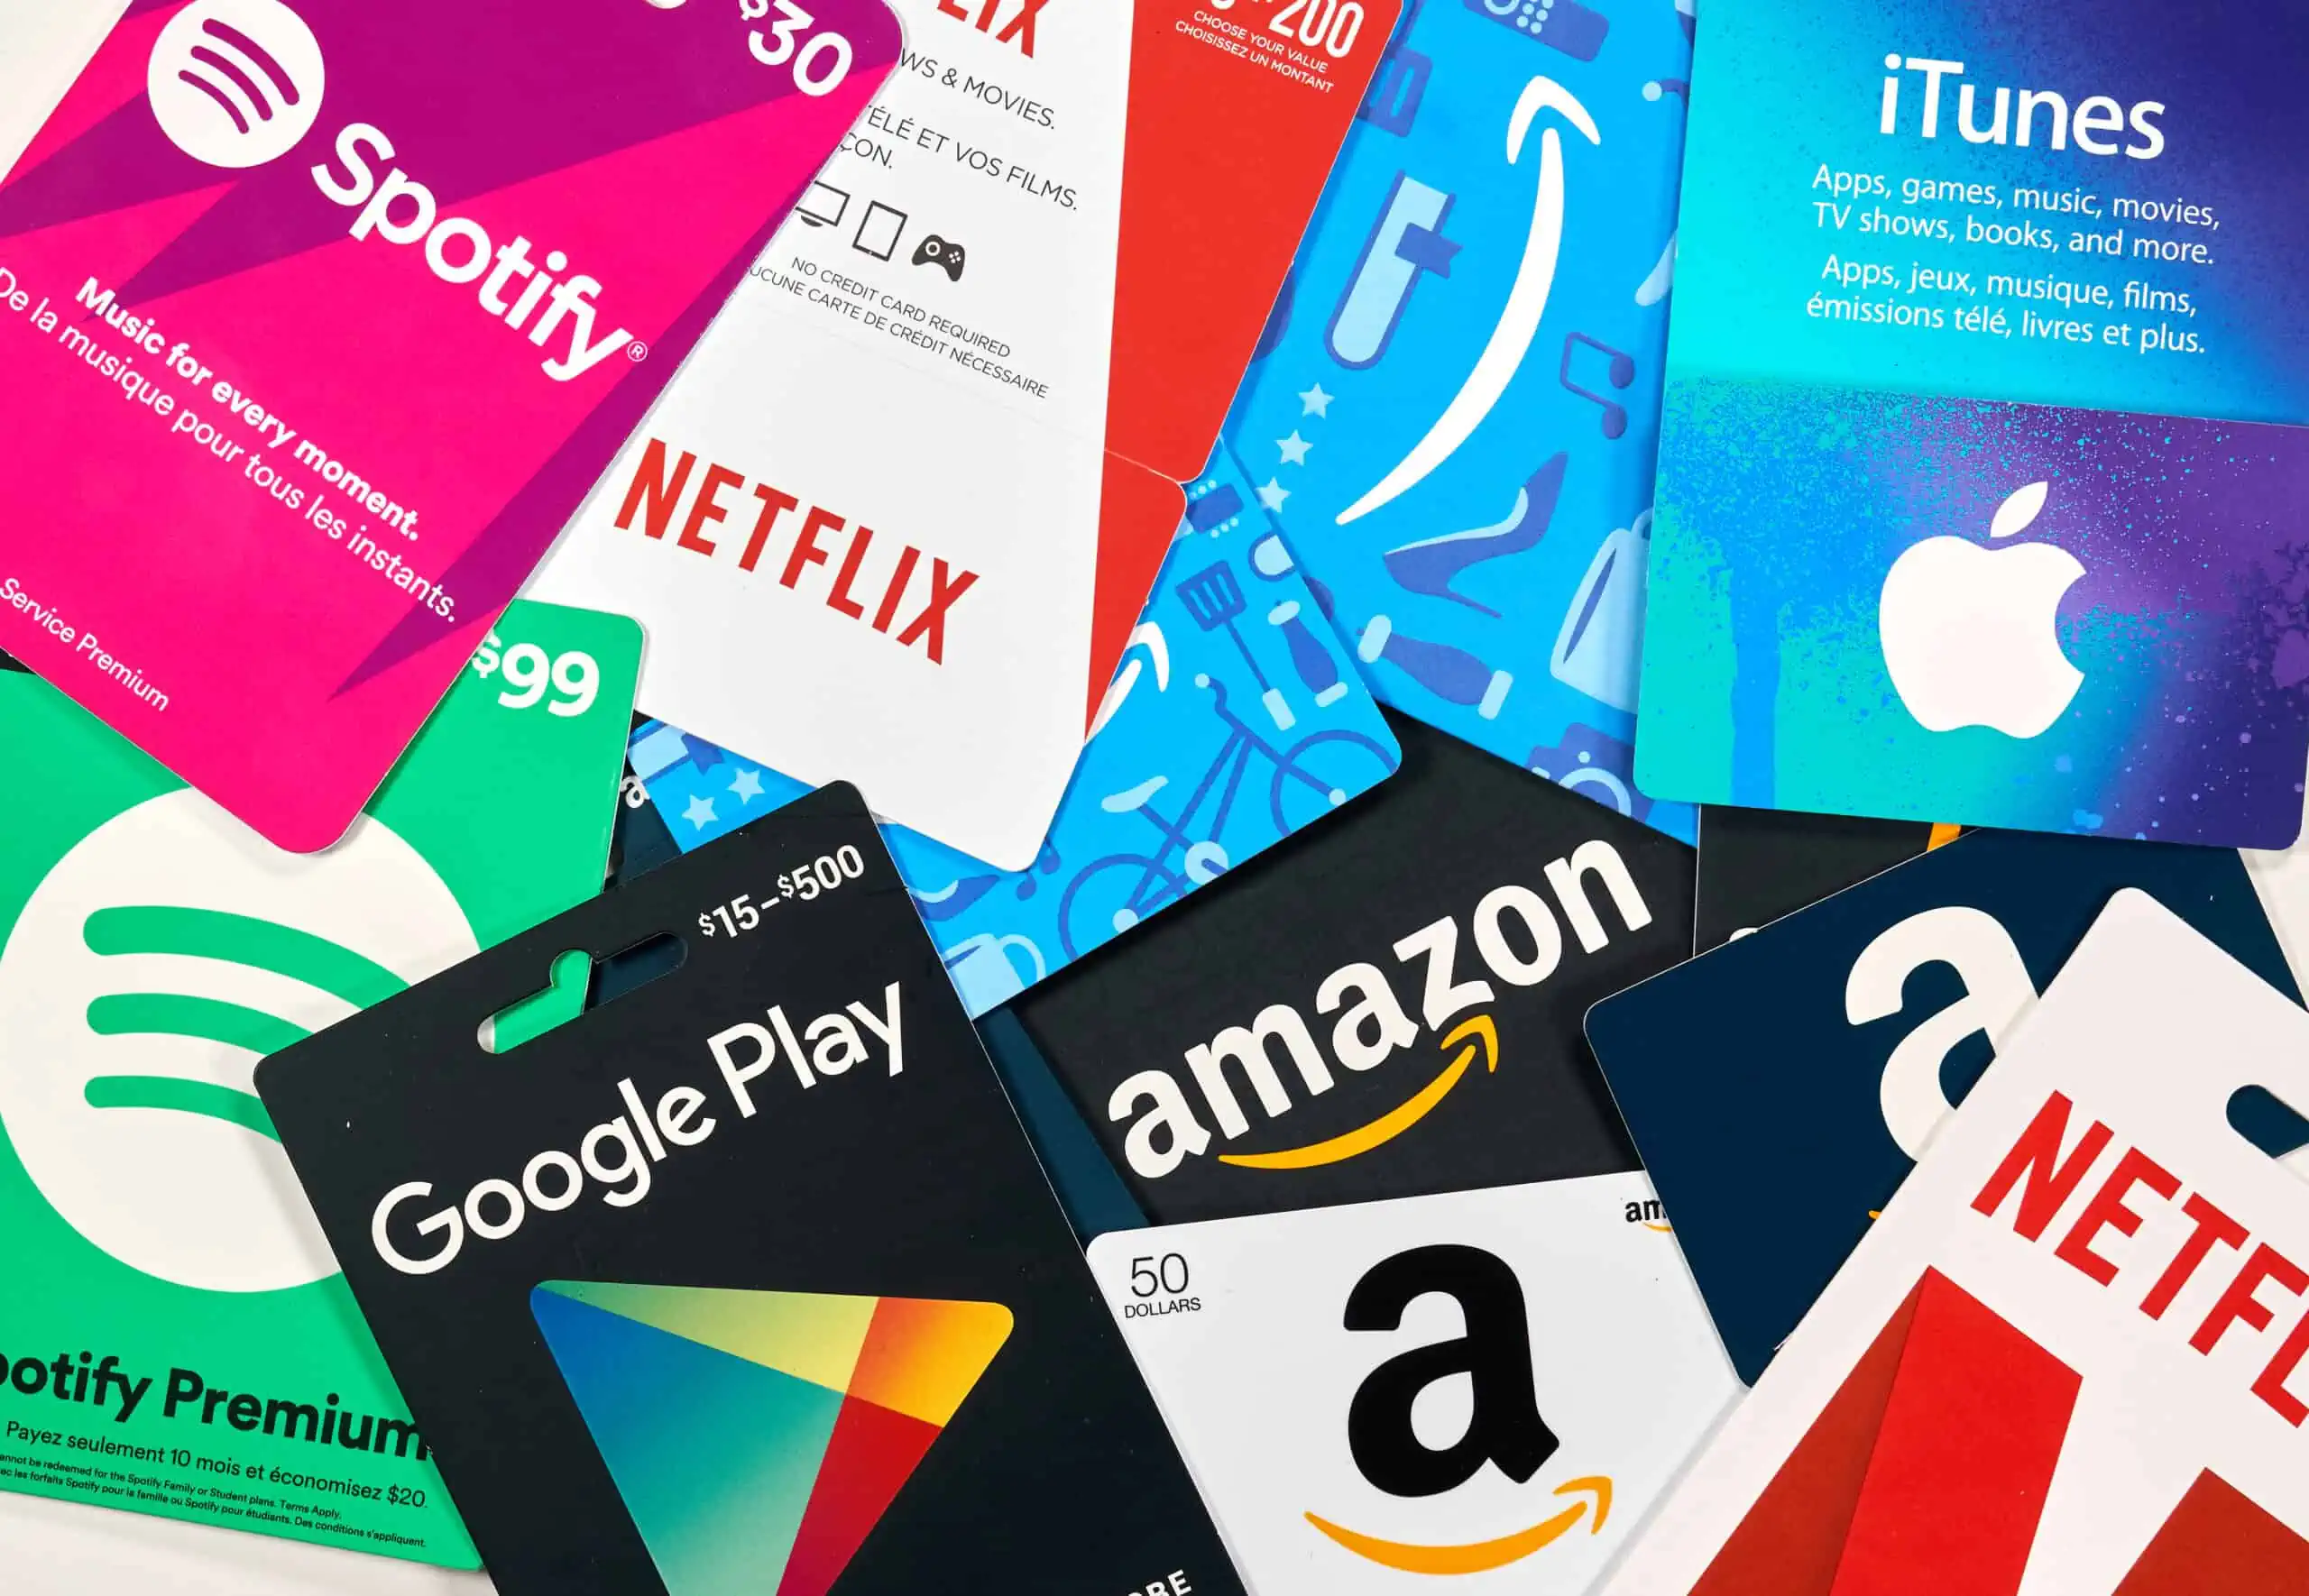 Different gift cards of many brands such as Amazon, Netflix, Xbox, Google Play, Best Buy, Spotify